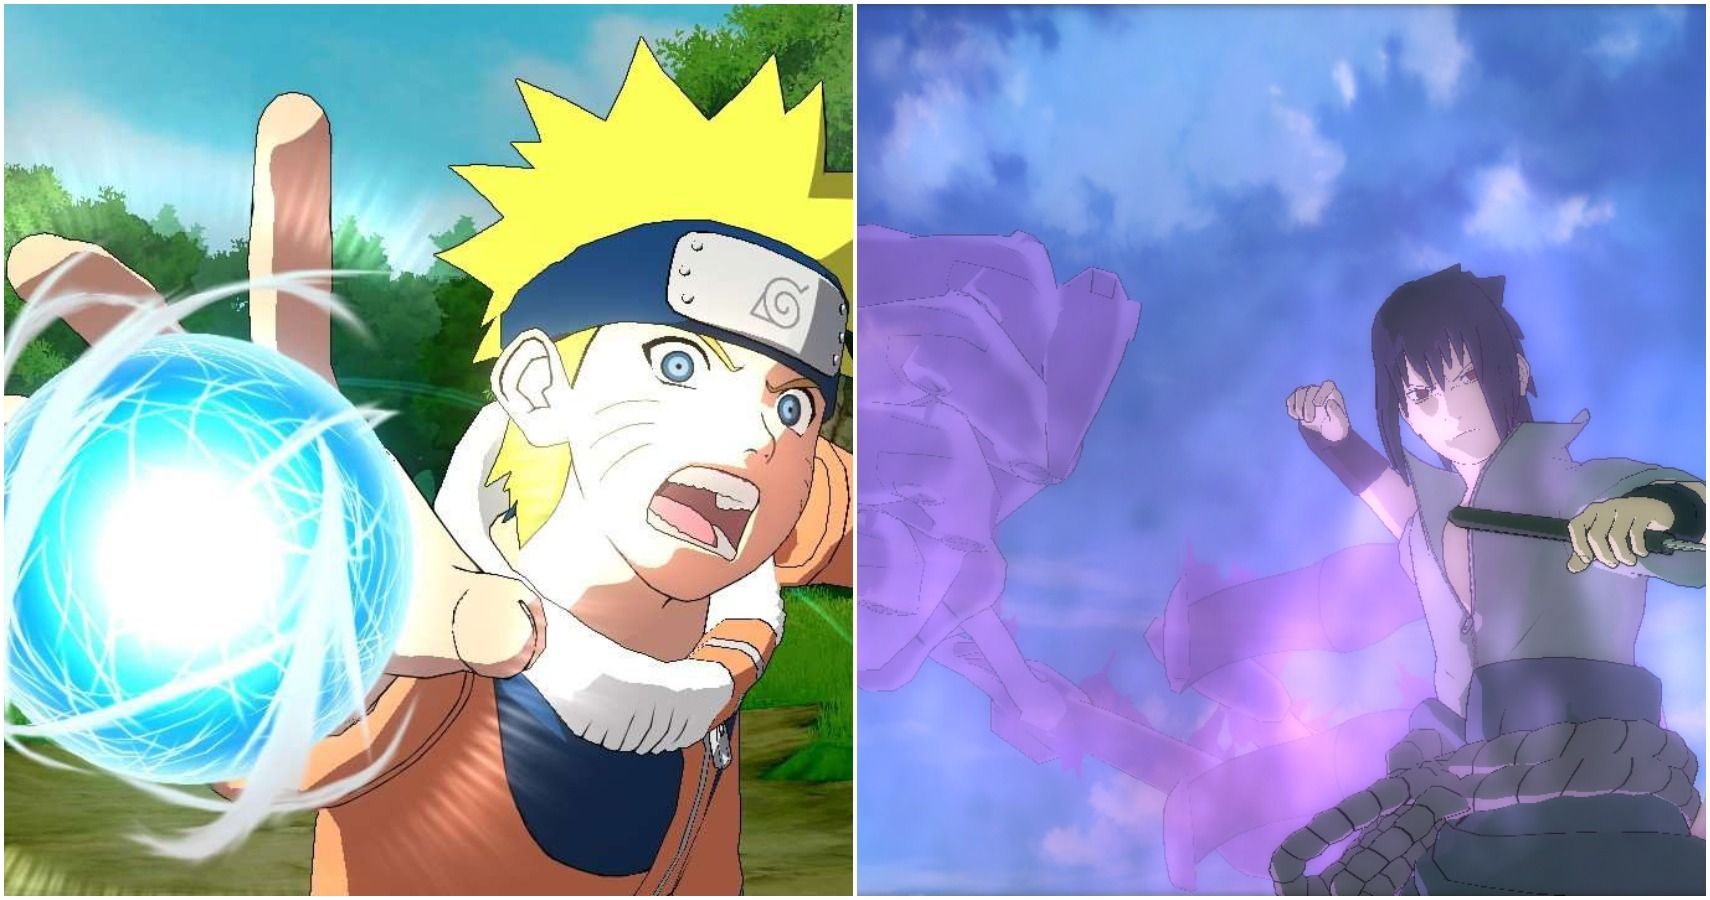 15 Best Naruto Video Games Ranked Thegamer - all new roblox naruto games 2019 pc